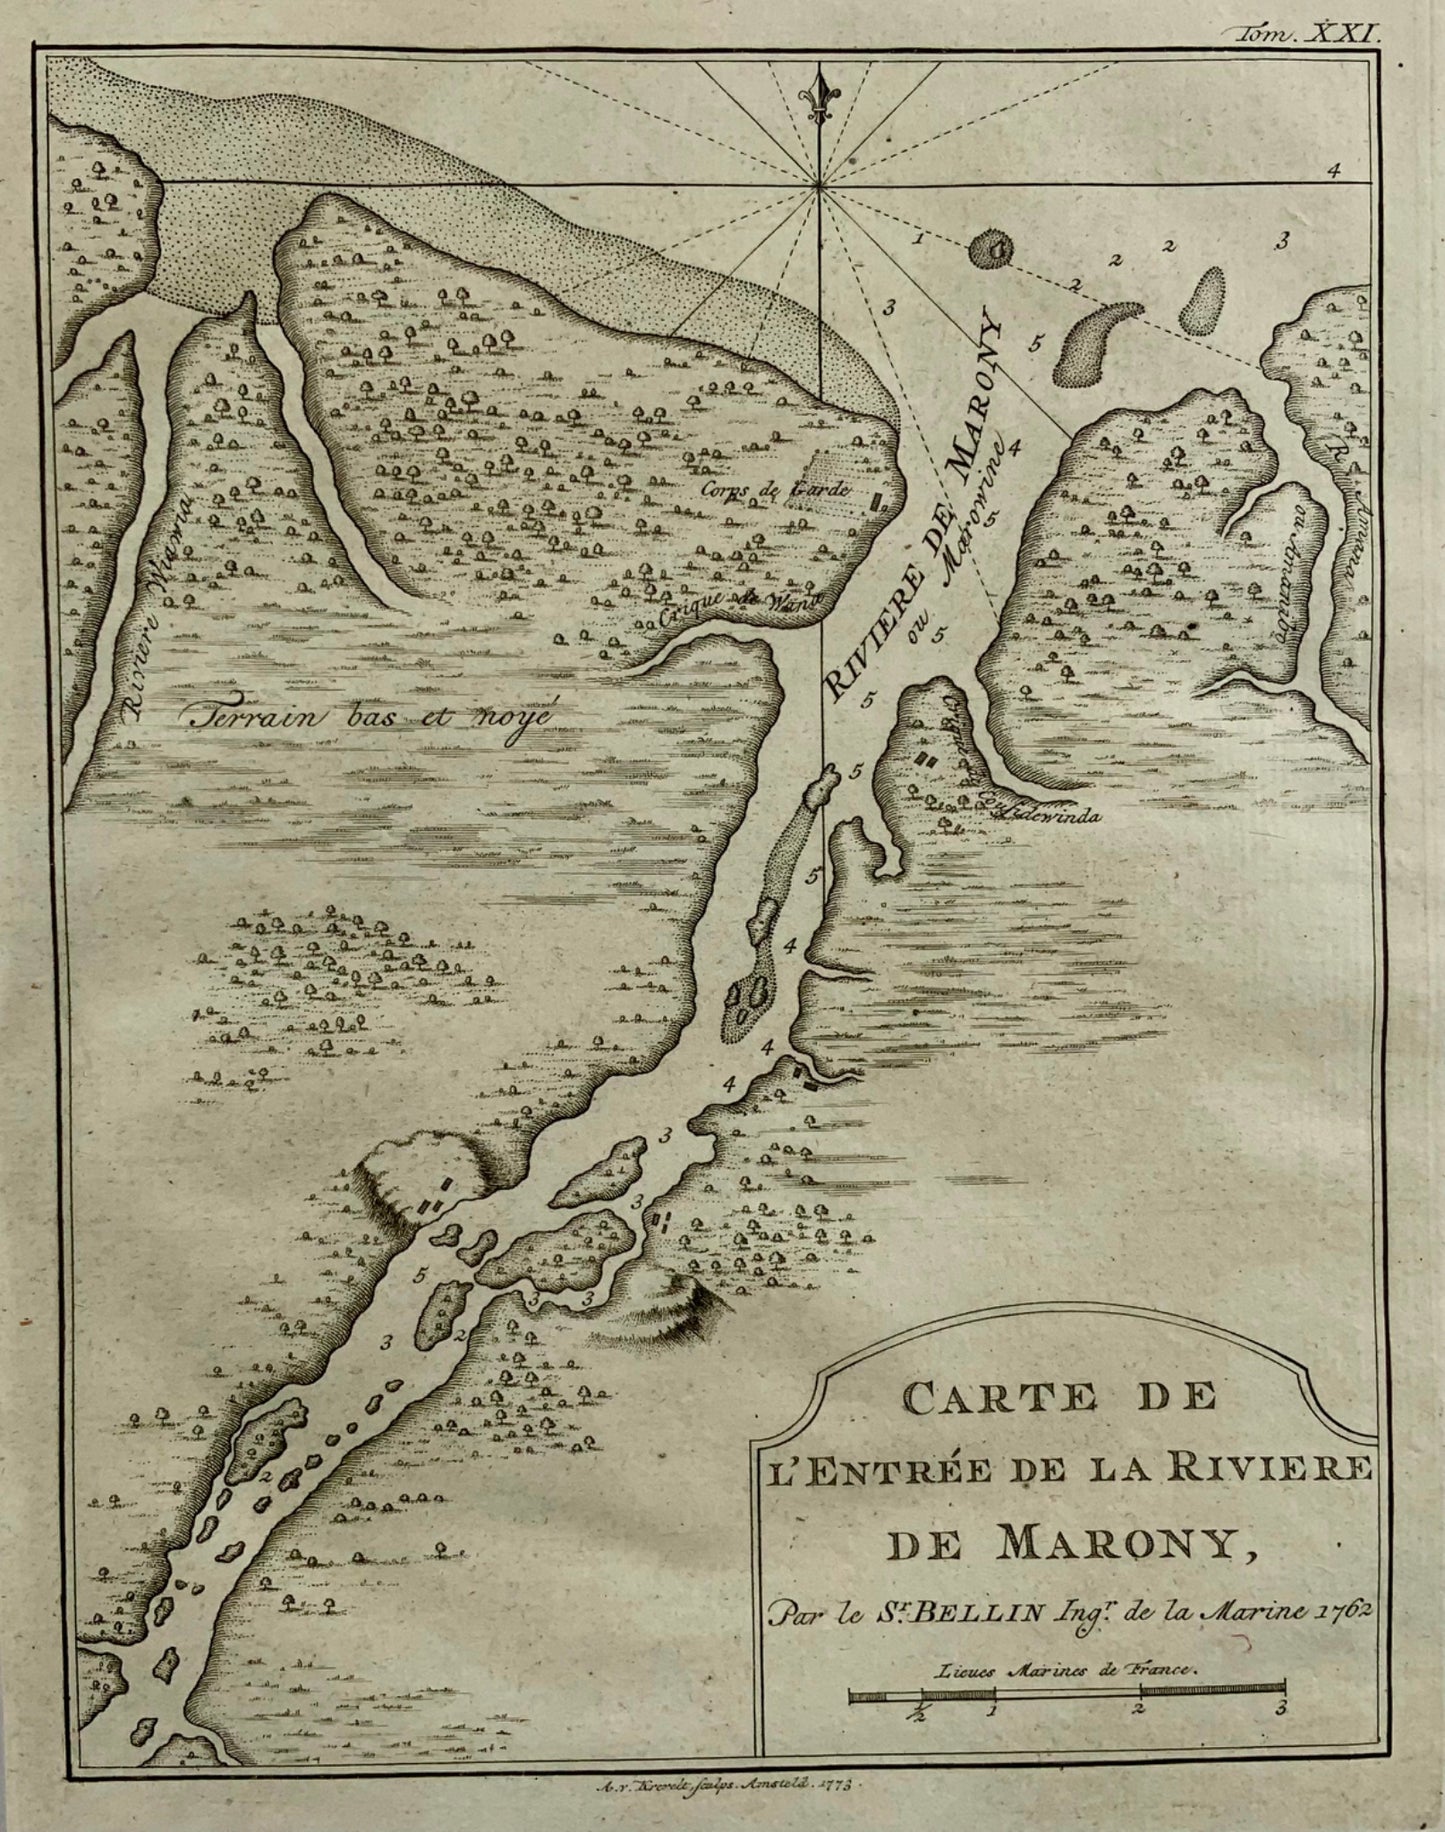 1762 Mouth of the River Marony, map, Bellin, French Guiana, Surname